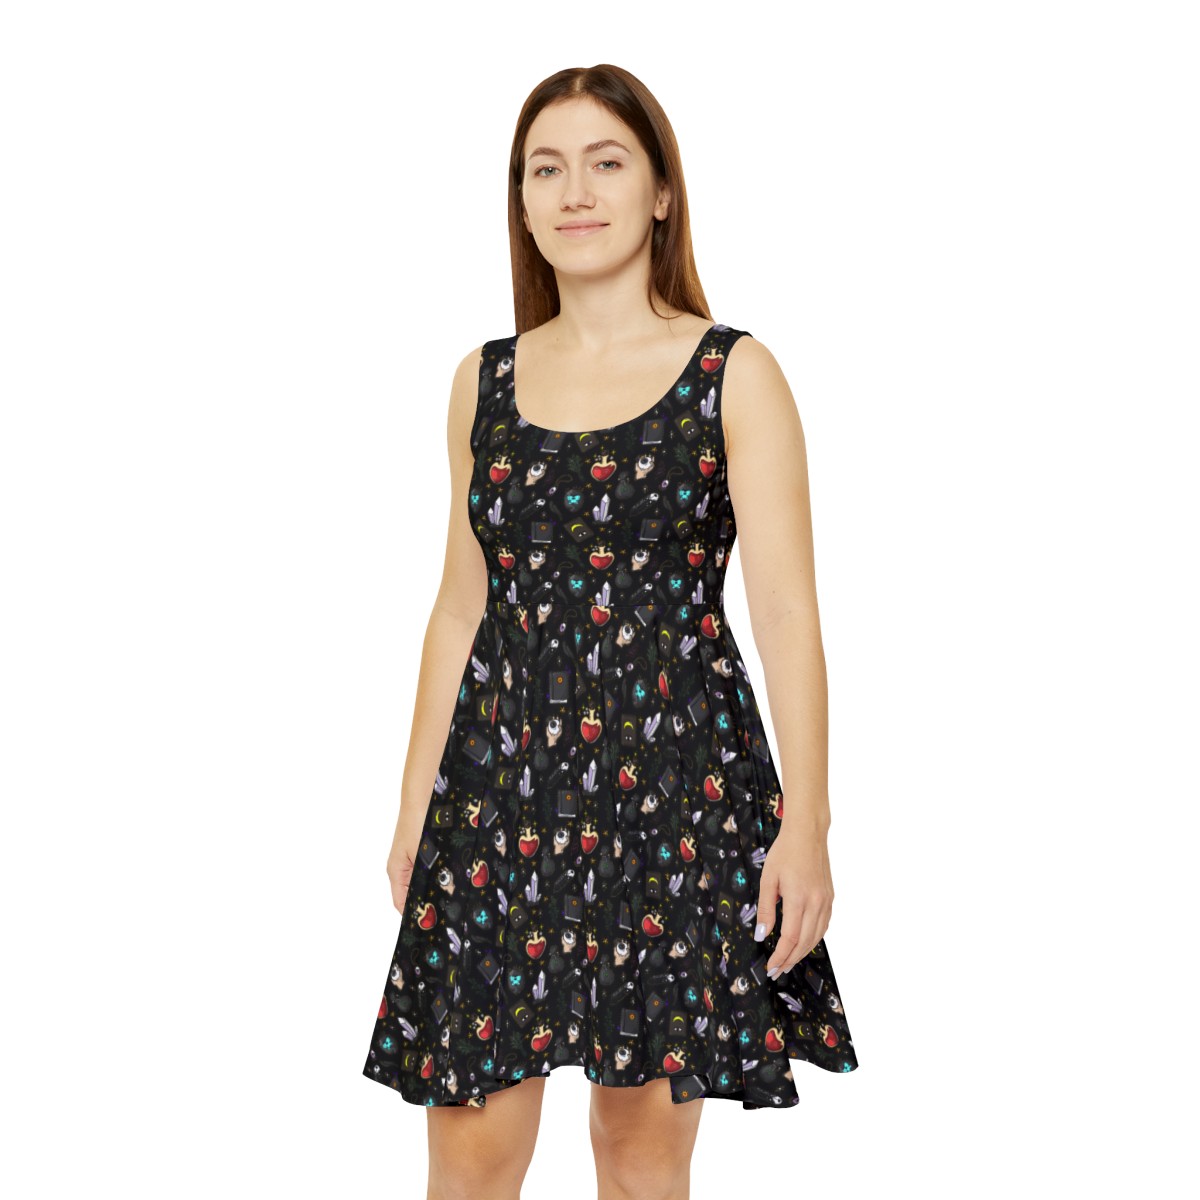 Cute Esoteric Colorful Women's Skater Dress product thumbnail image